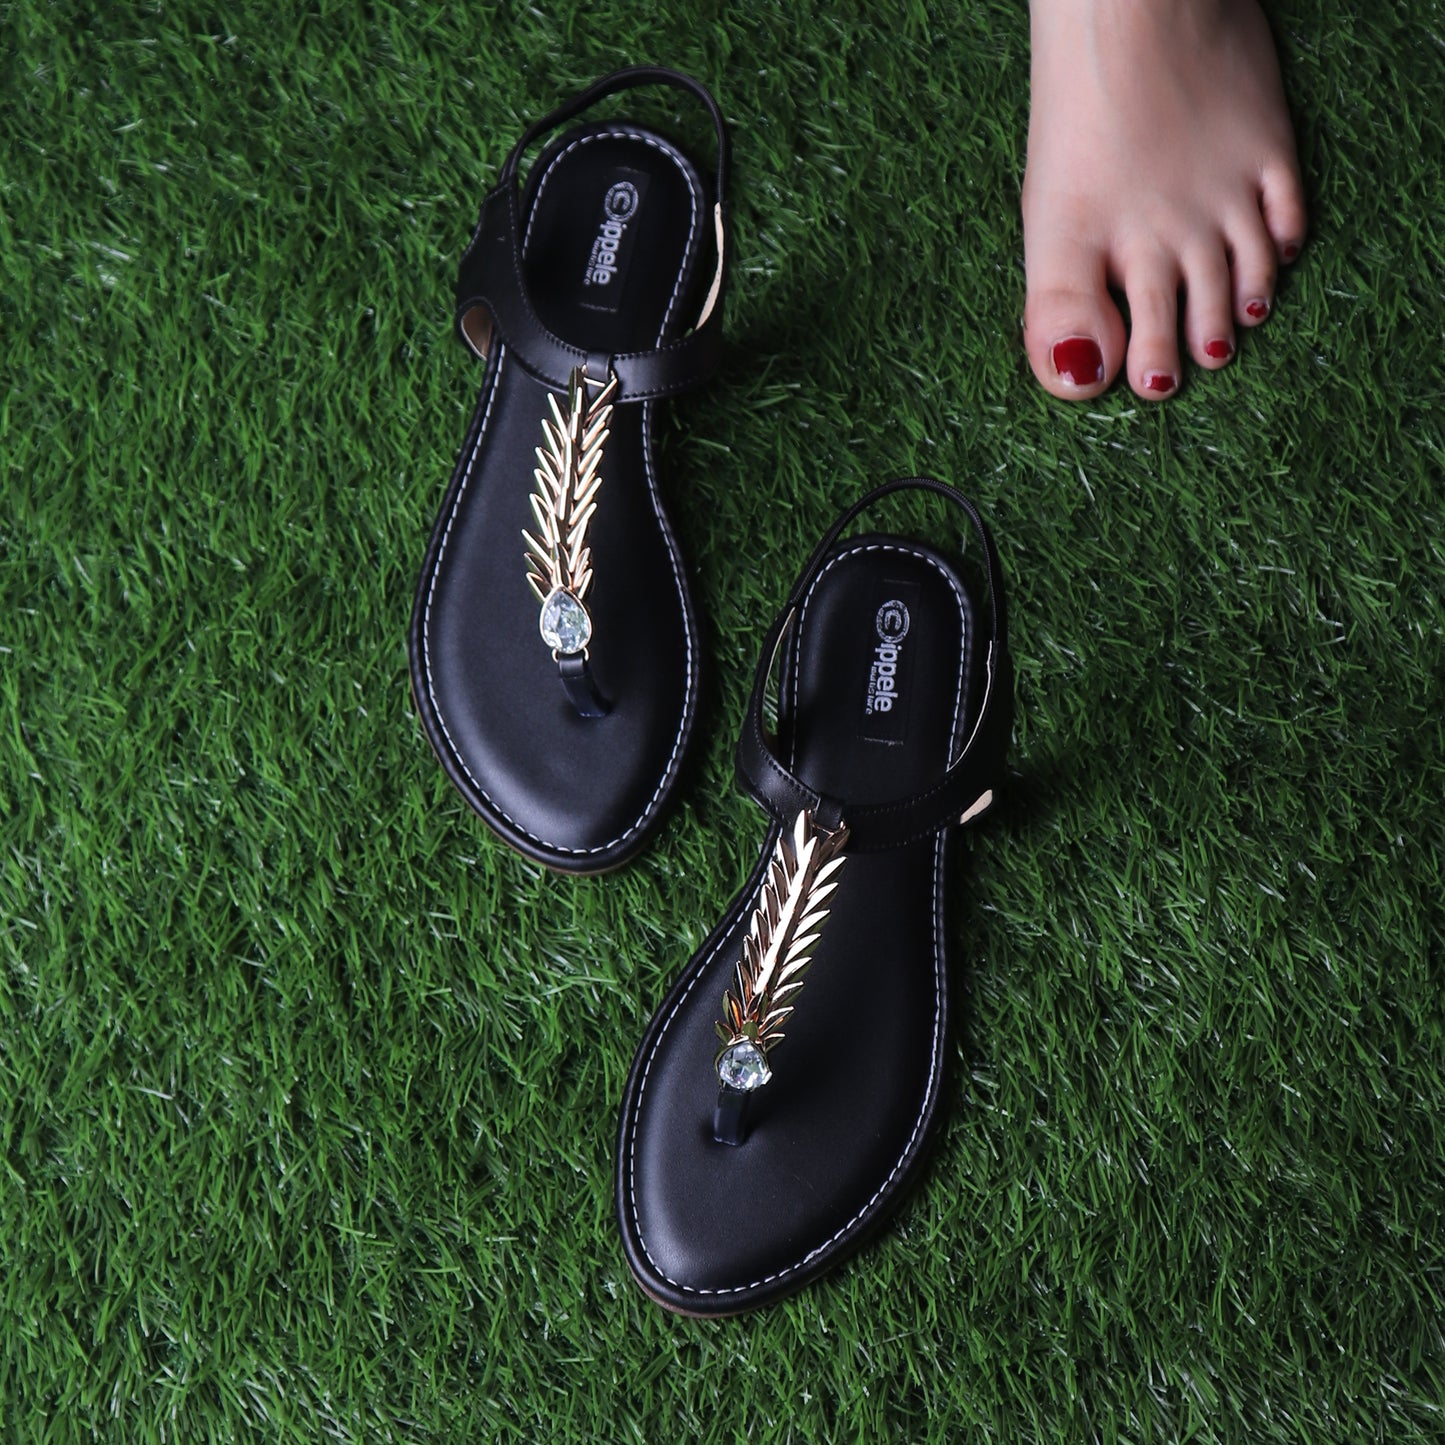 Foot Wear,The Palm Branch Flats in Black - Cippele Multi Store